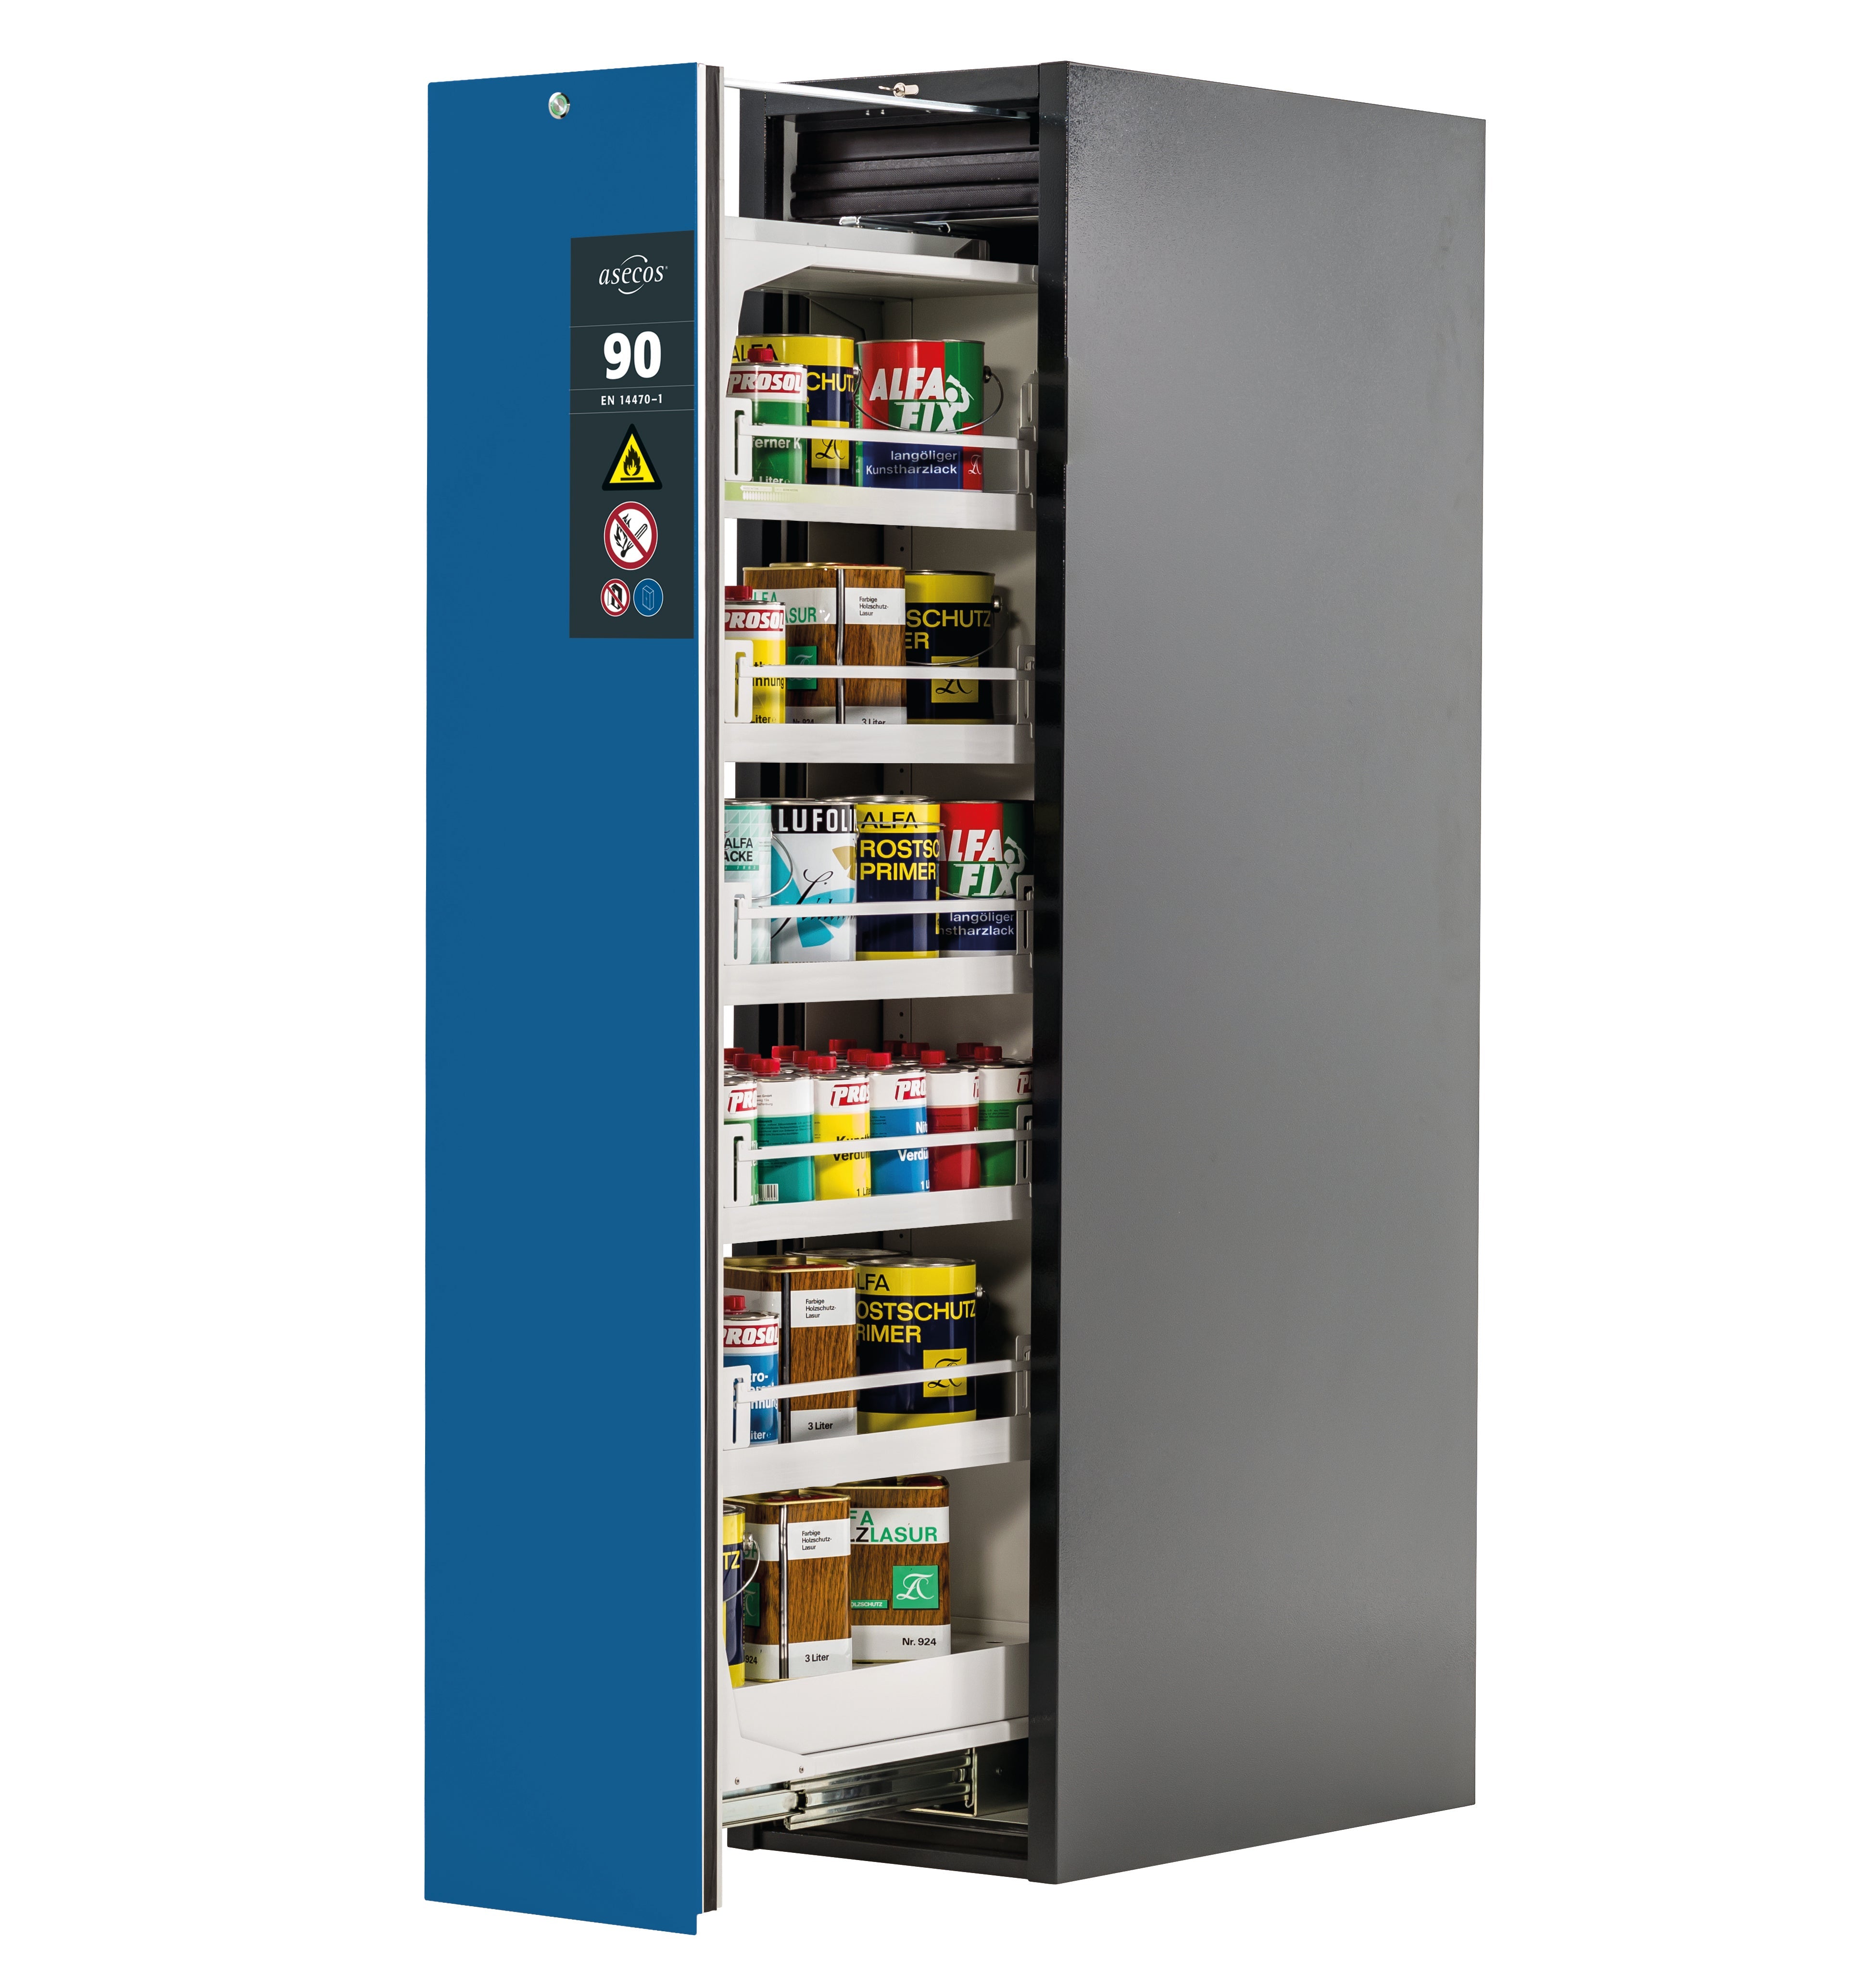 Type 90 safety cabinet V-MOVE-90 model V90.196.045.VDAC:0013 in gentian blue RAL 5010 with 5x standard tray base (sheet steel)